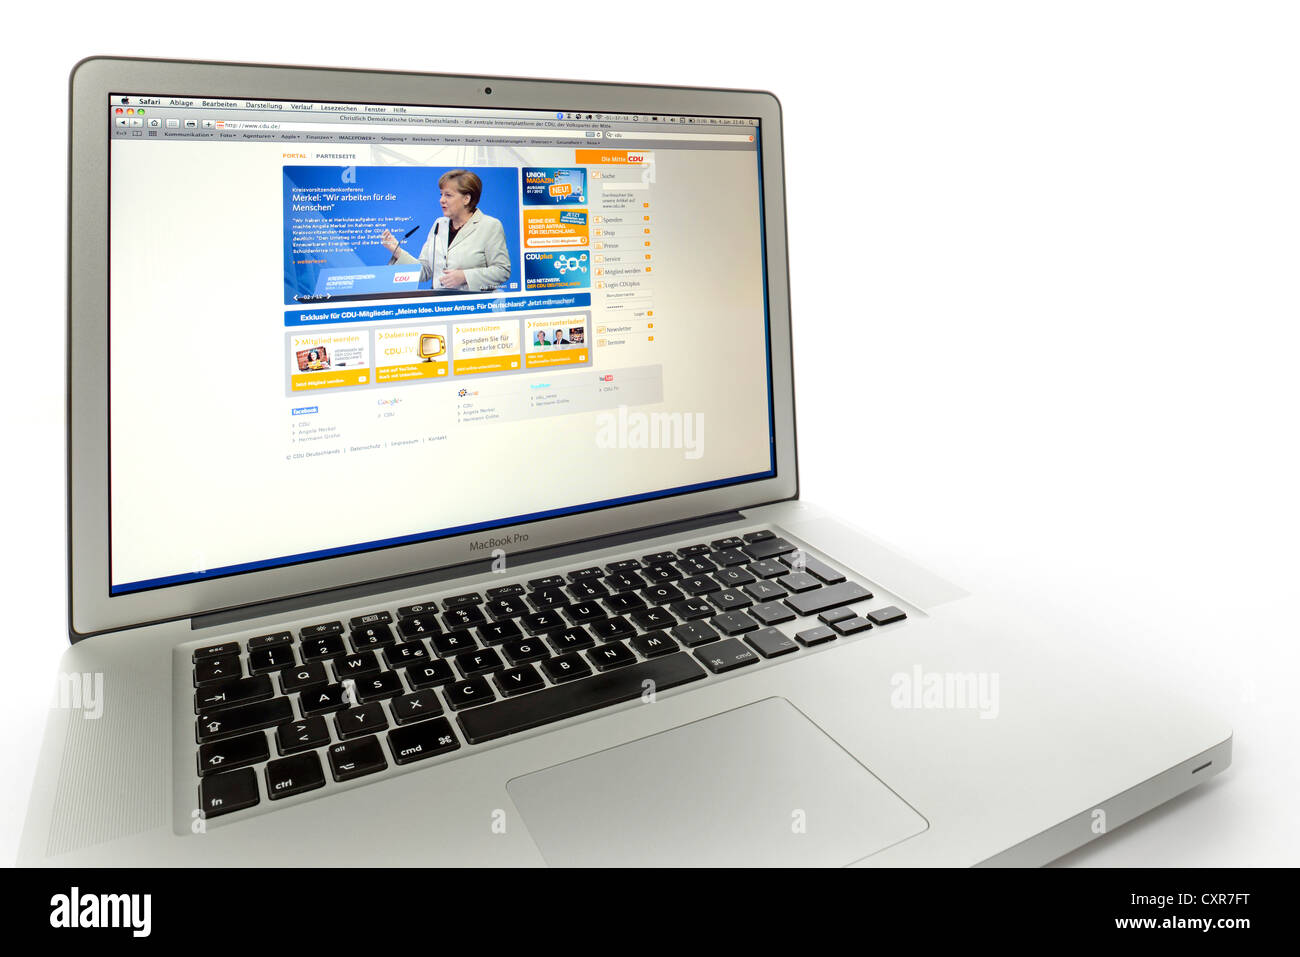 CDU, political party, website displayed on the screen of an Apple MacBook Pro Stock Photo